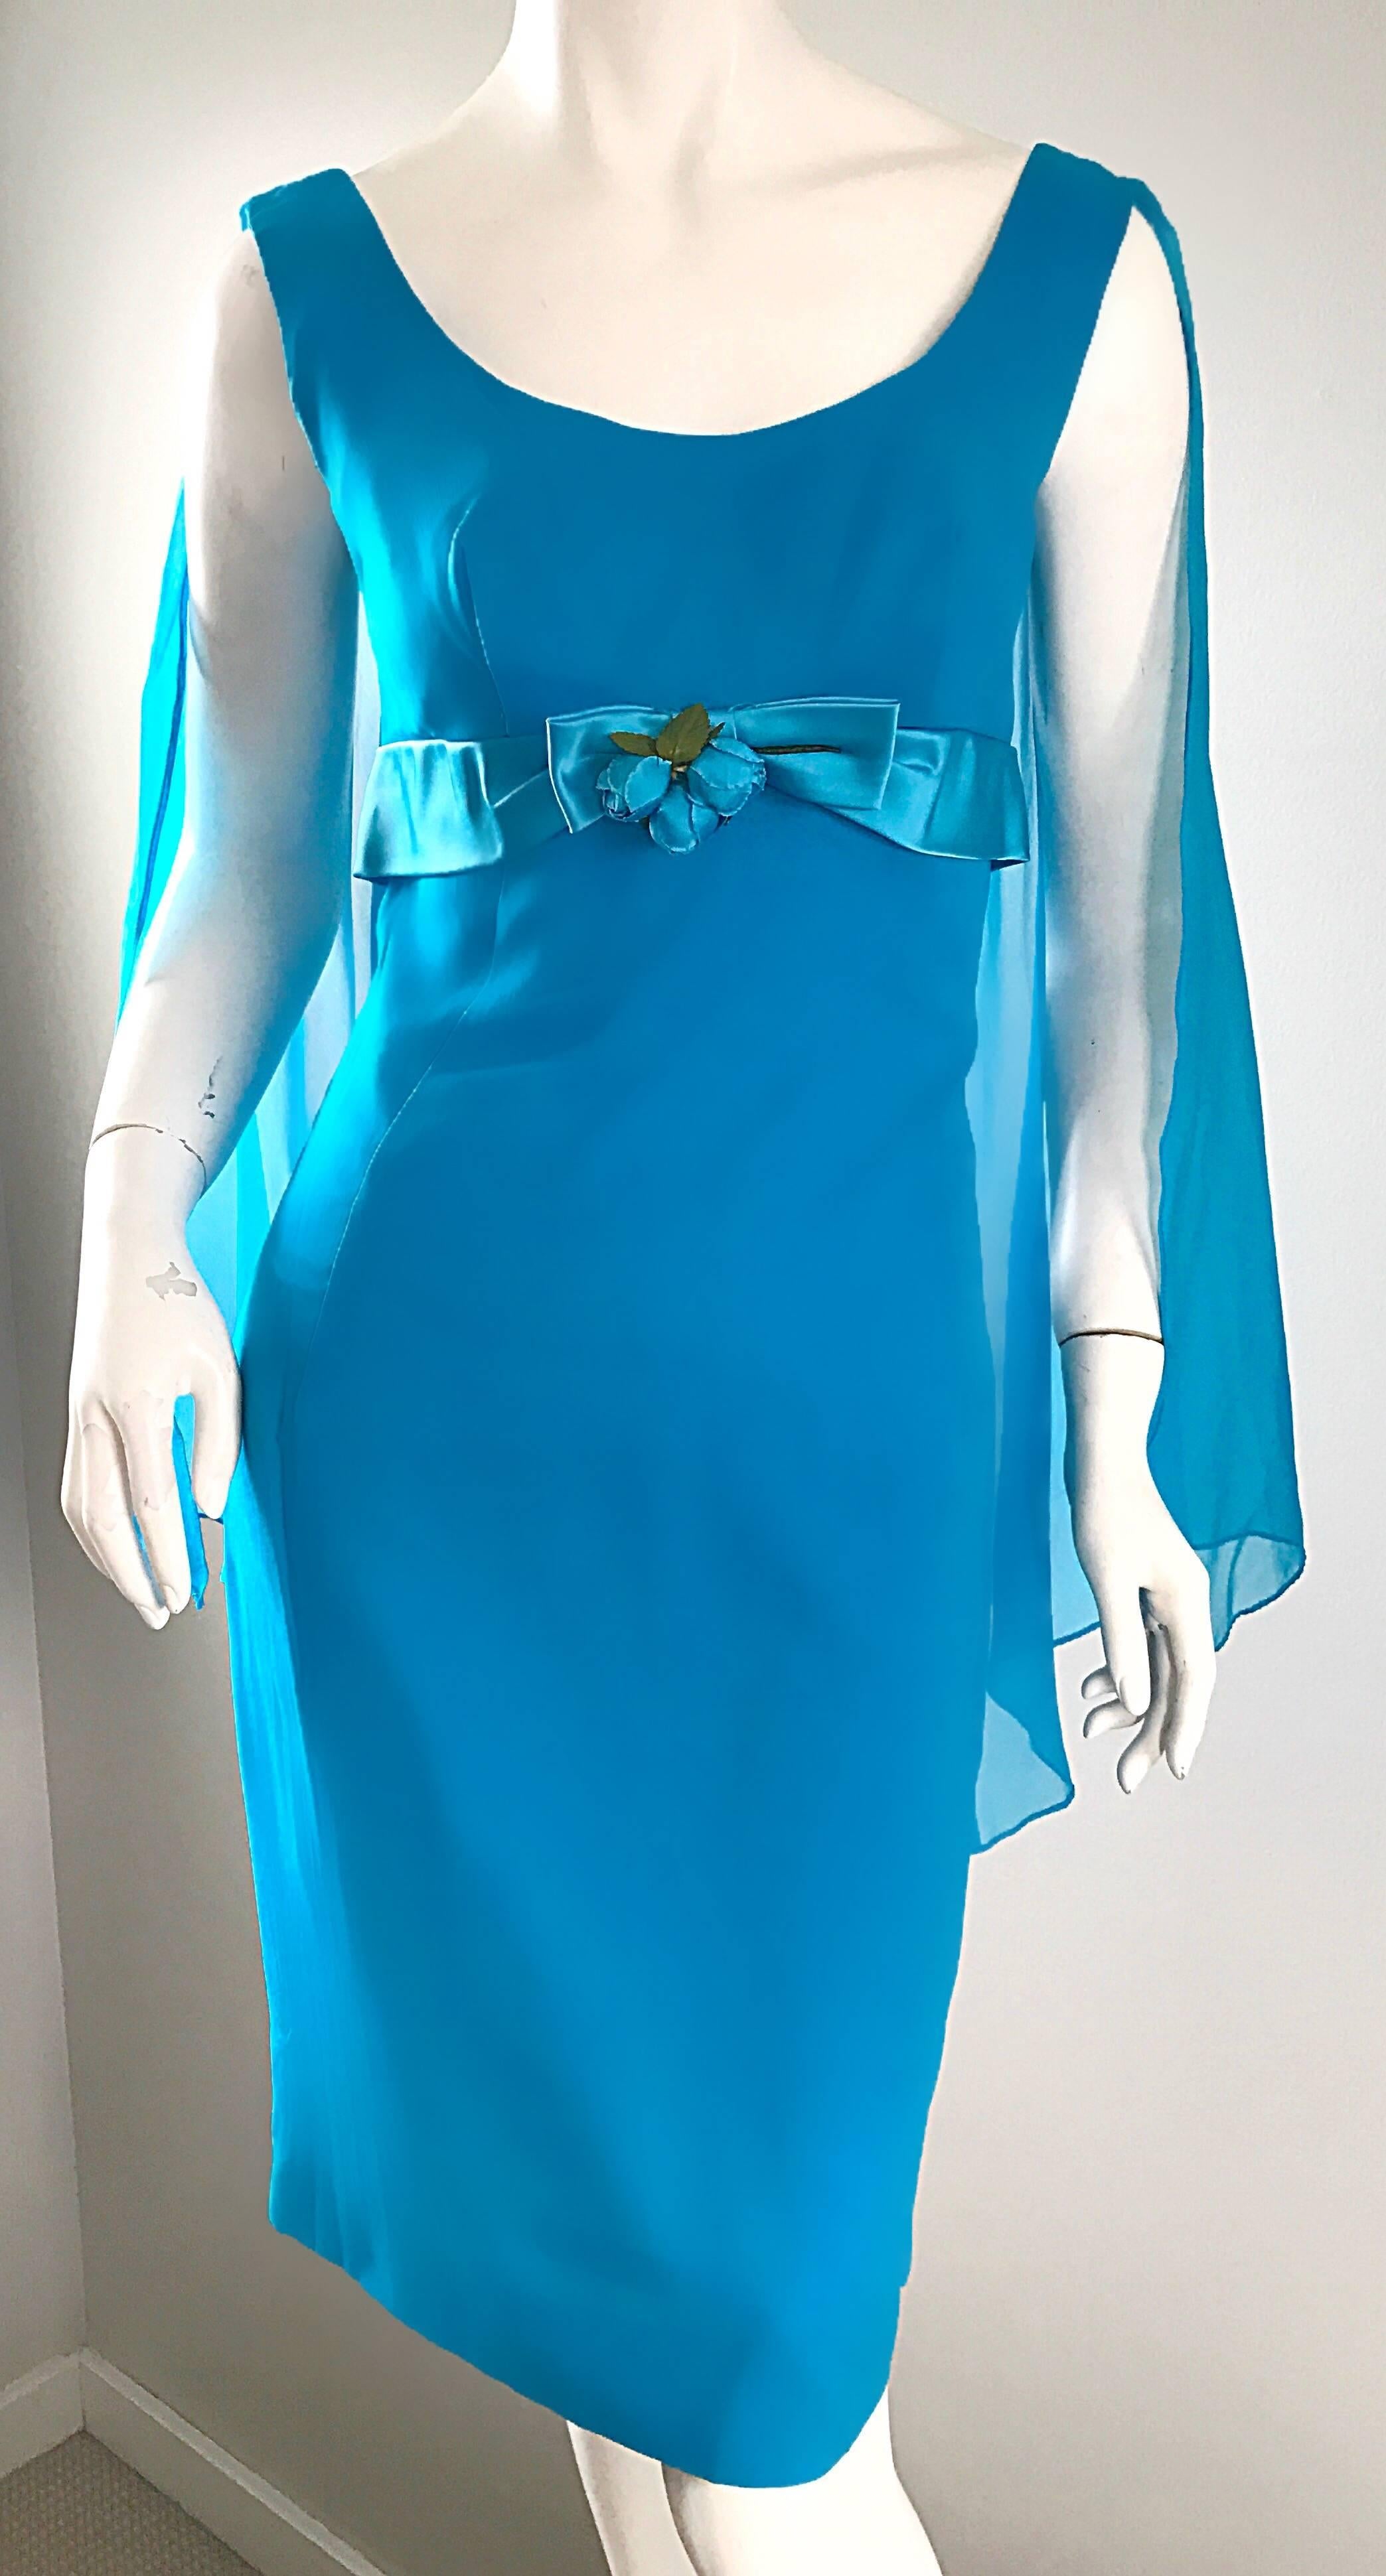 Women's Amazing 1960s Turquoise Blue Chiffon Vintage Wiggle 60s Dress w/ Attached Cape For Sale